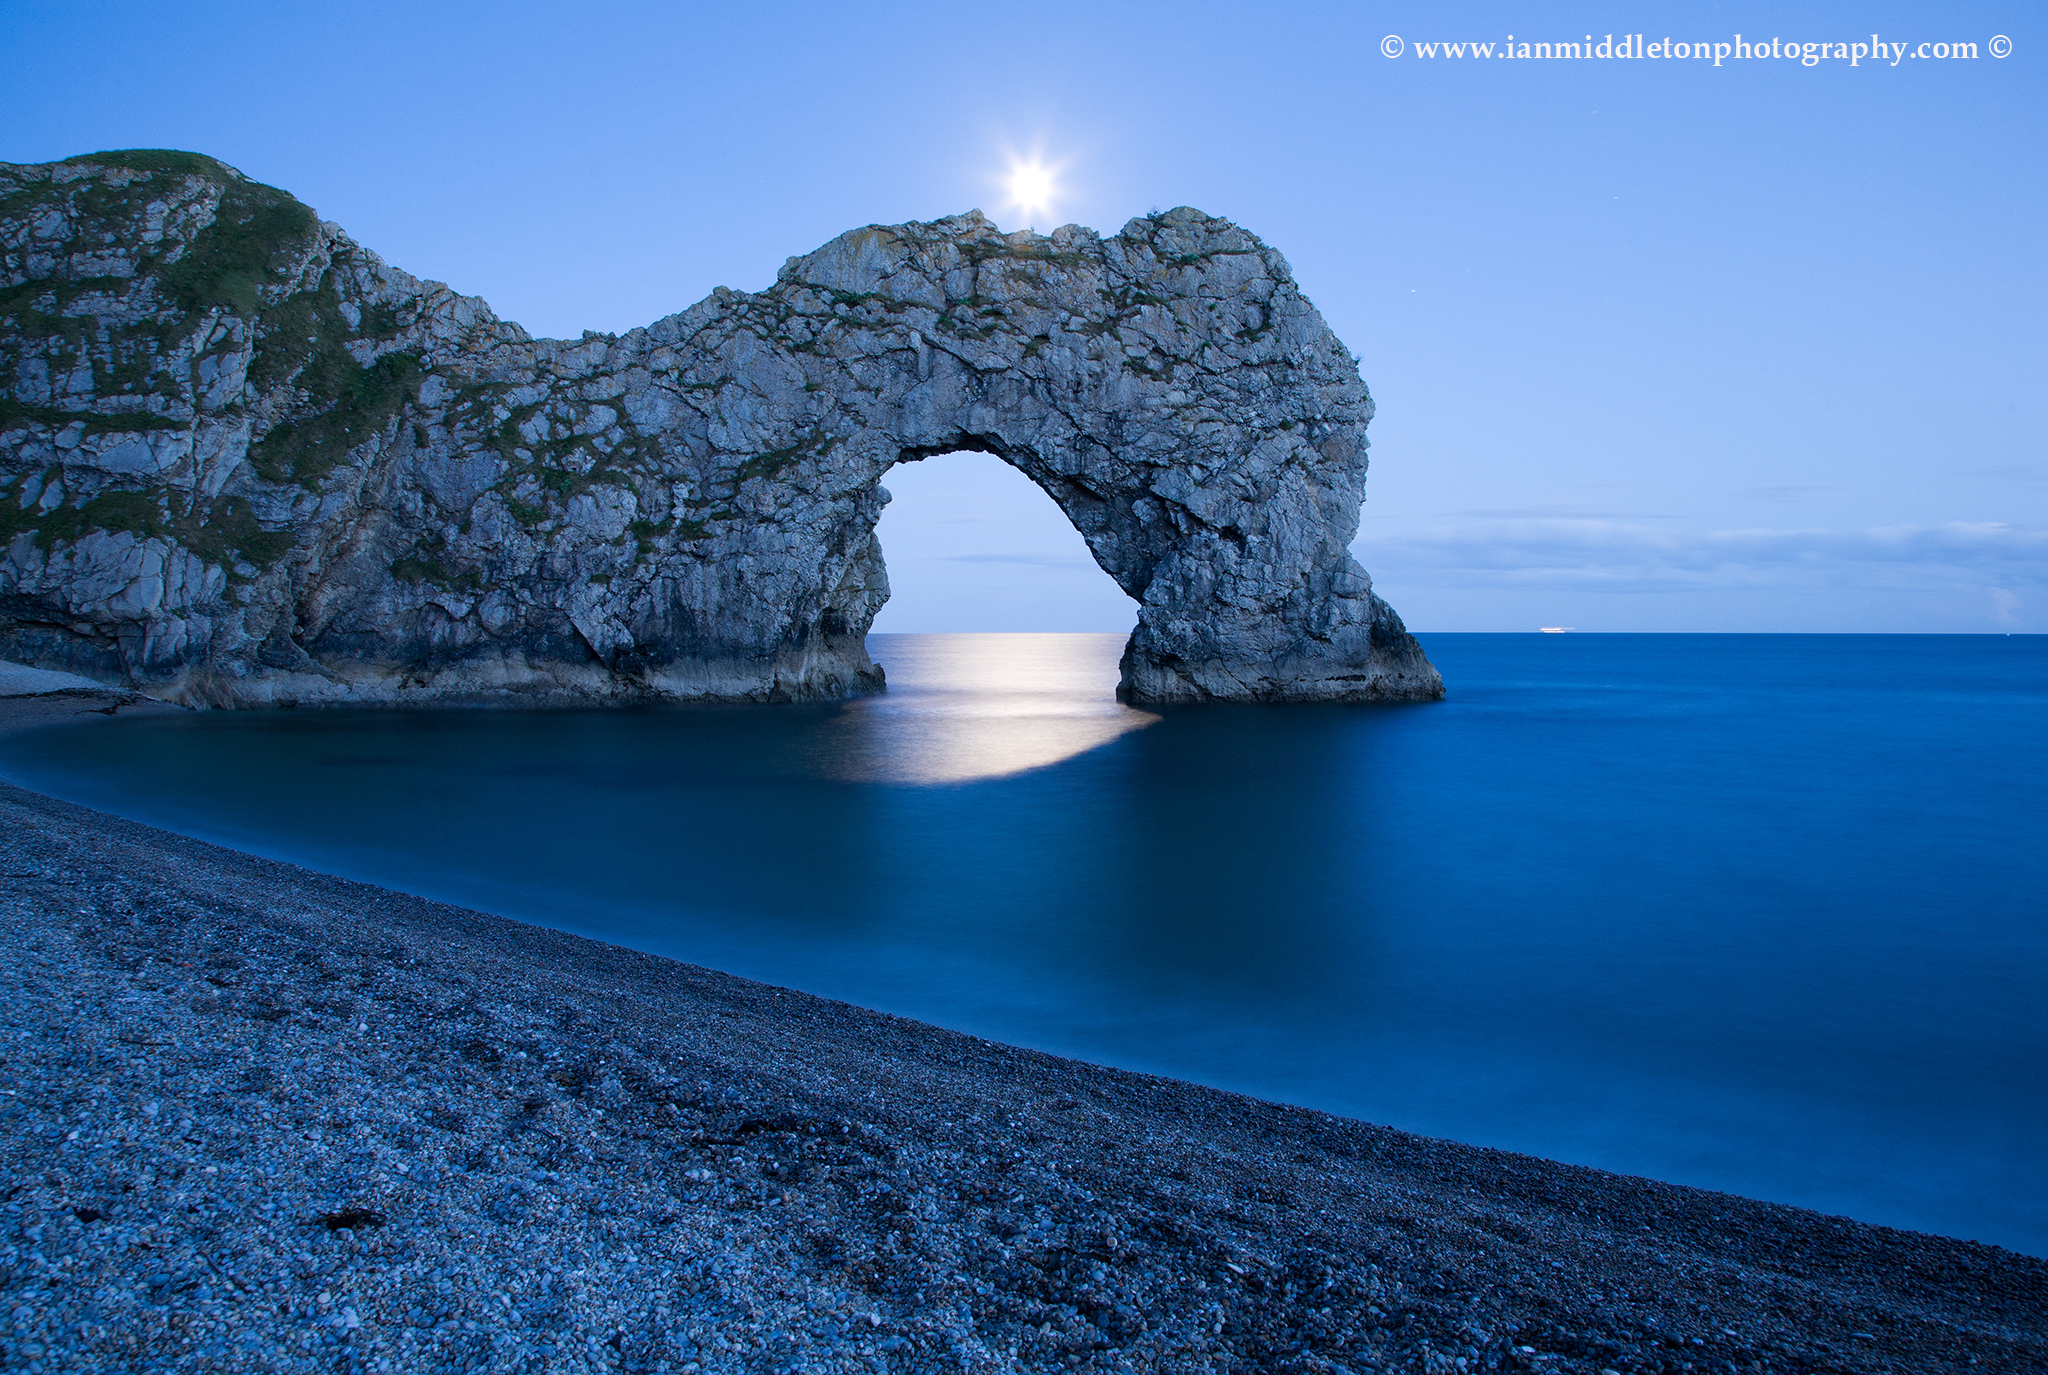 Durdle Door in the moonlight, Dorset, England. Captured late evening as the moonlight flooded through the rock's archway. Durdle door is one of the many stunning locations to visit on the Jurassic coast in southern England.